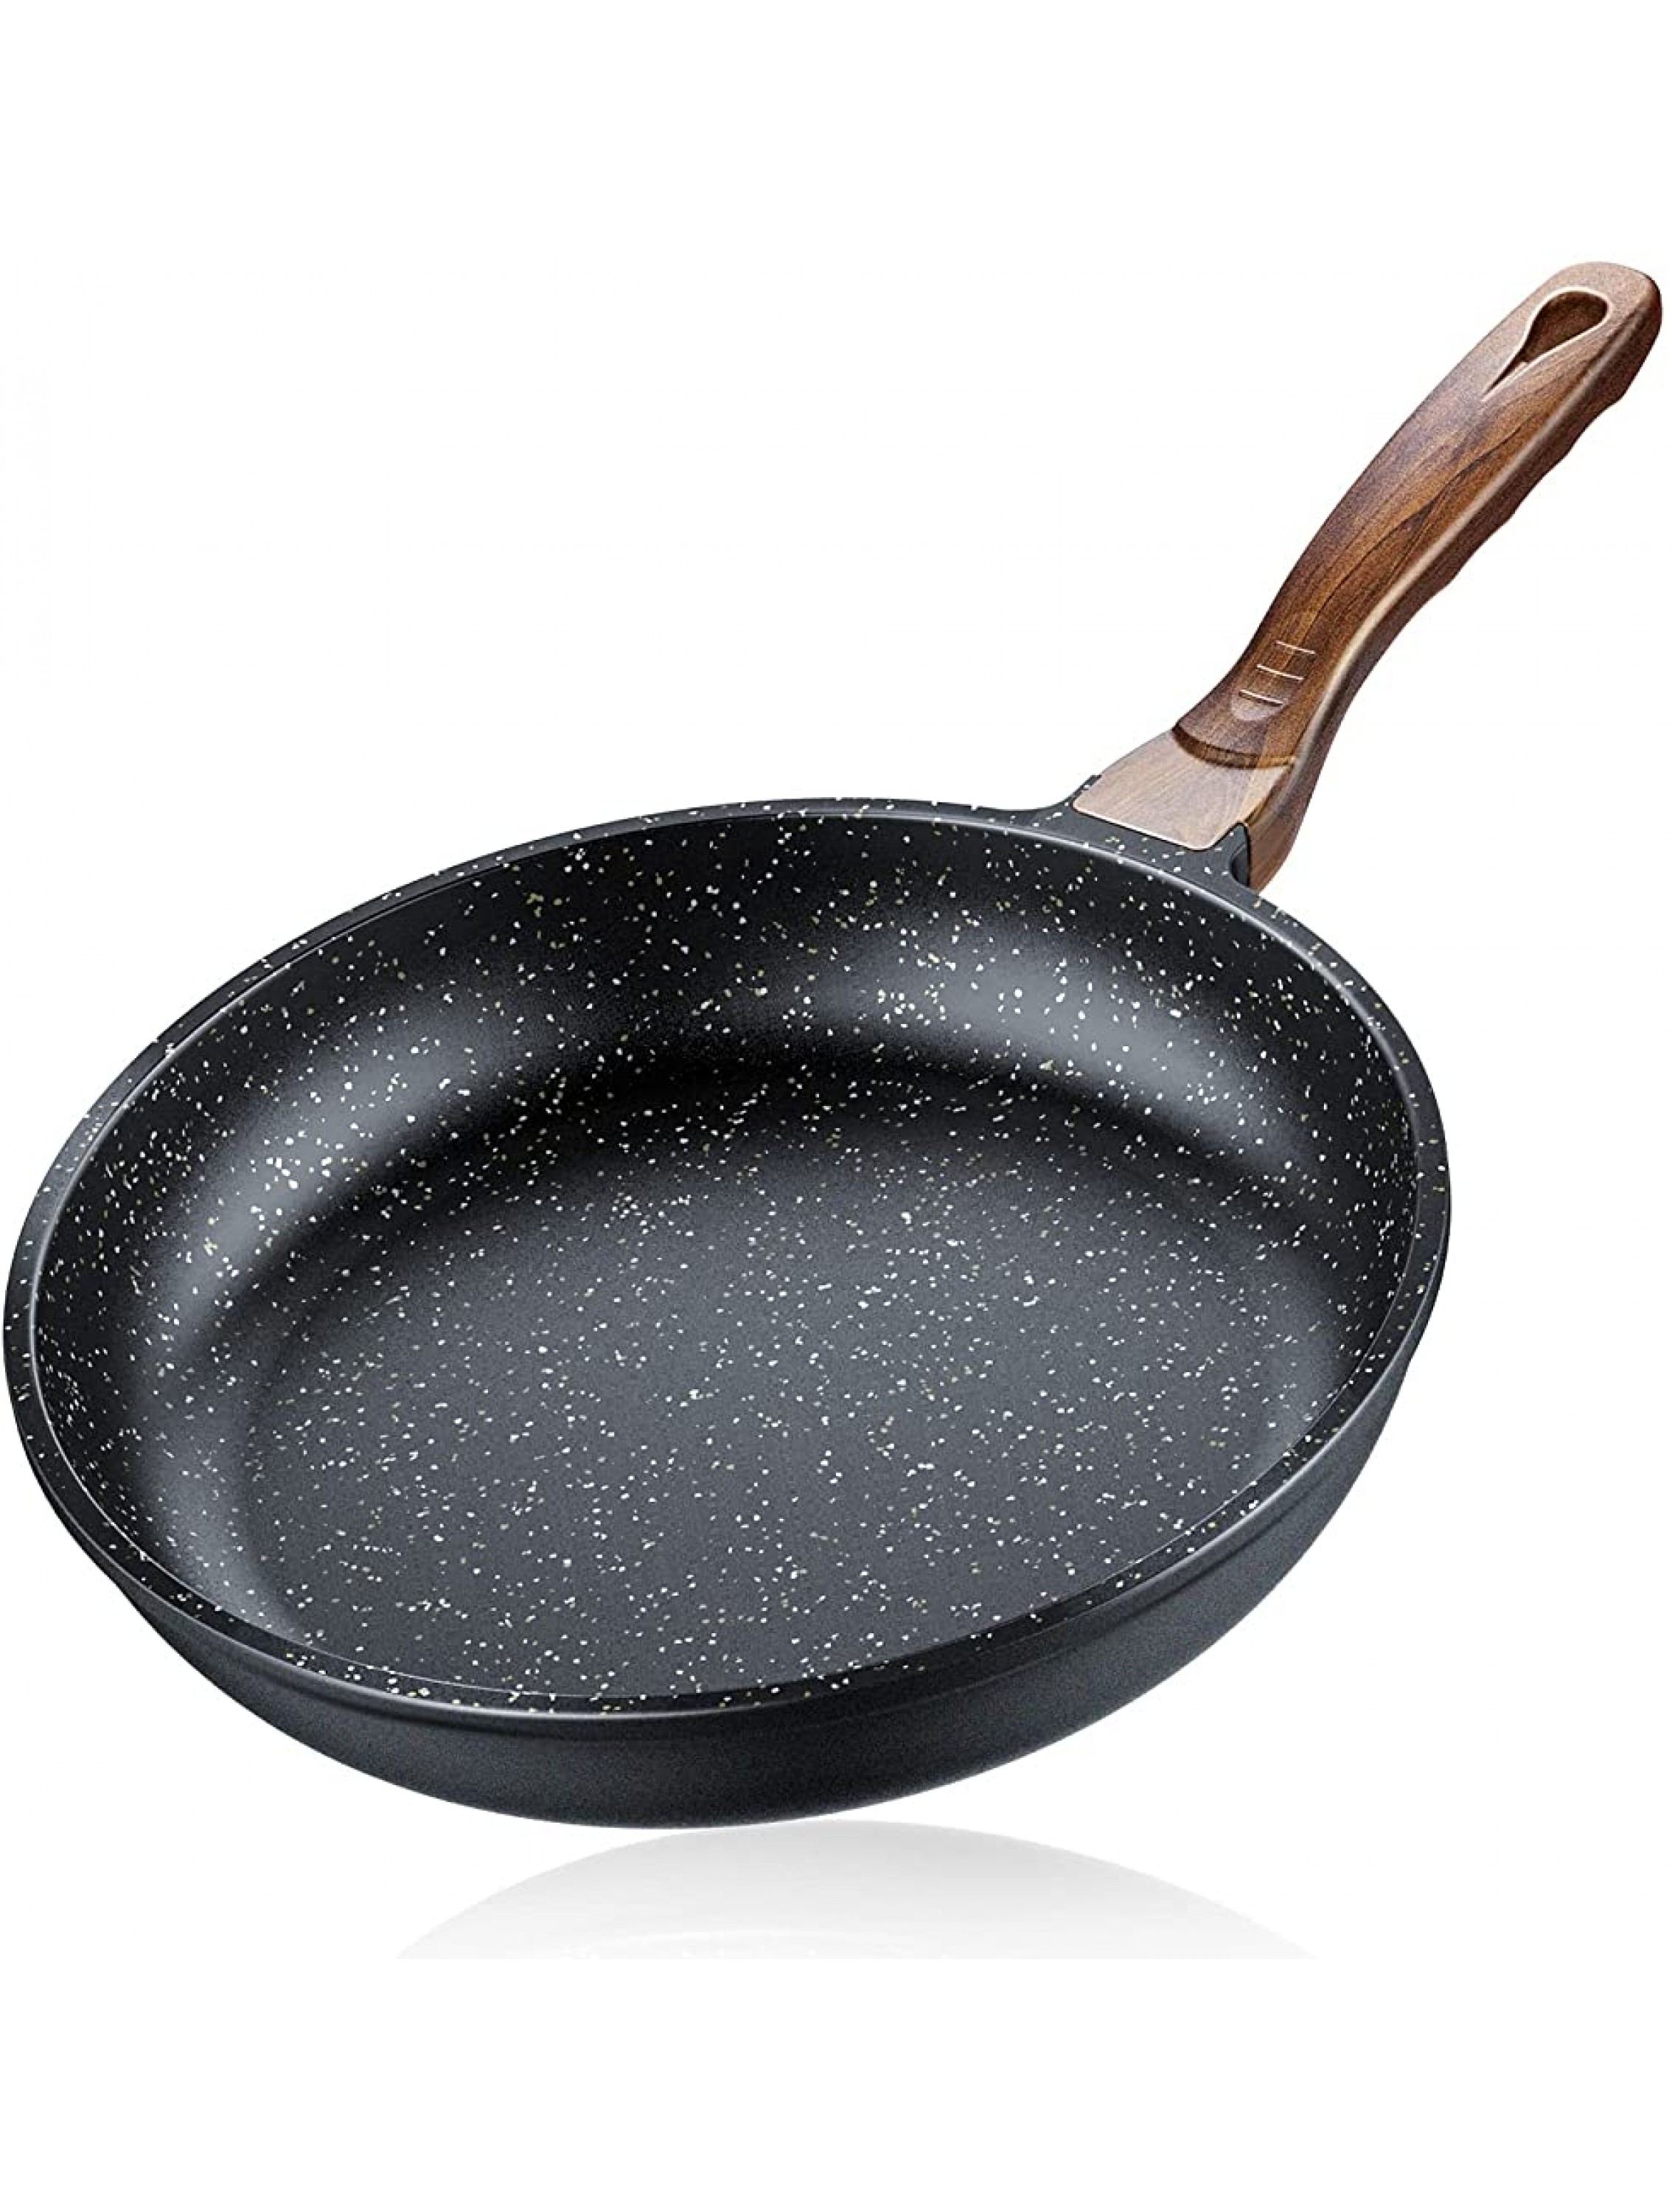 Ferlord Nonstick Frying Pan Skillet 9.5,100% PFOA &BPA free Heating Quickly and Evenly Less Oil Fumes,Heat-Resistant Soft Bakelite Handle 24cm Healthy Chef's Pan Suitable for All Stove - B3YDMYMOI